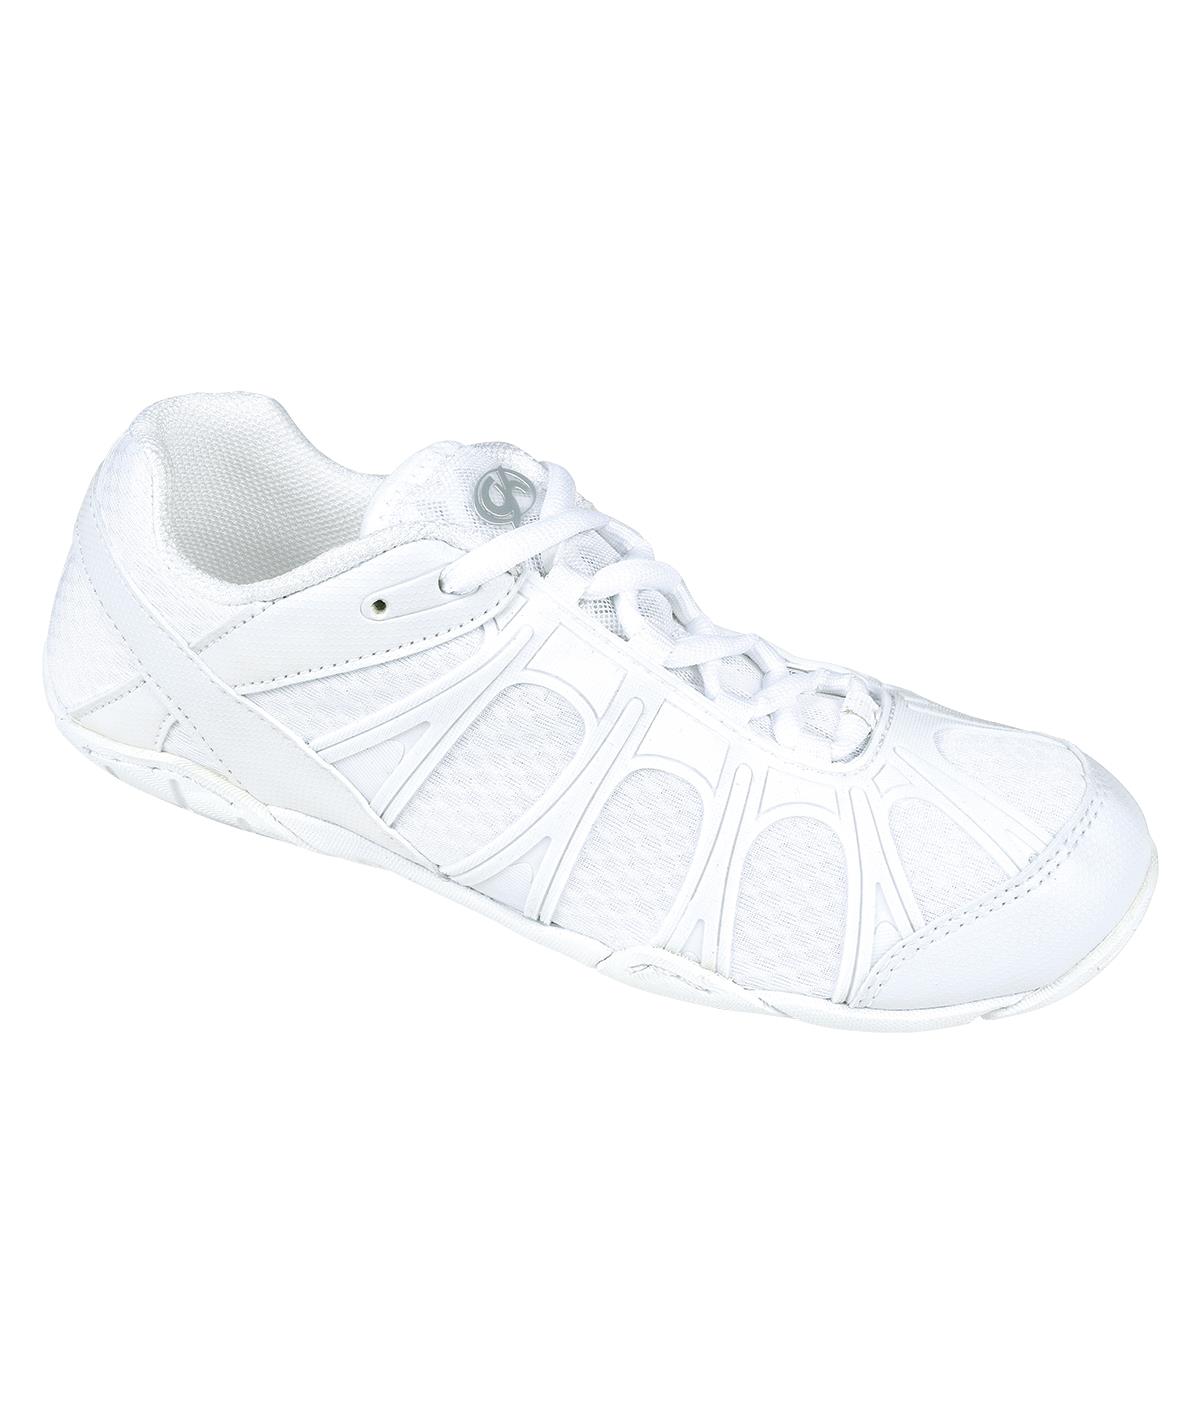 Shop black cheerleading sneakers and in-stock cheer shoes at Omni Cheer ...